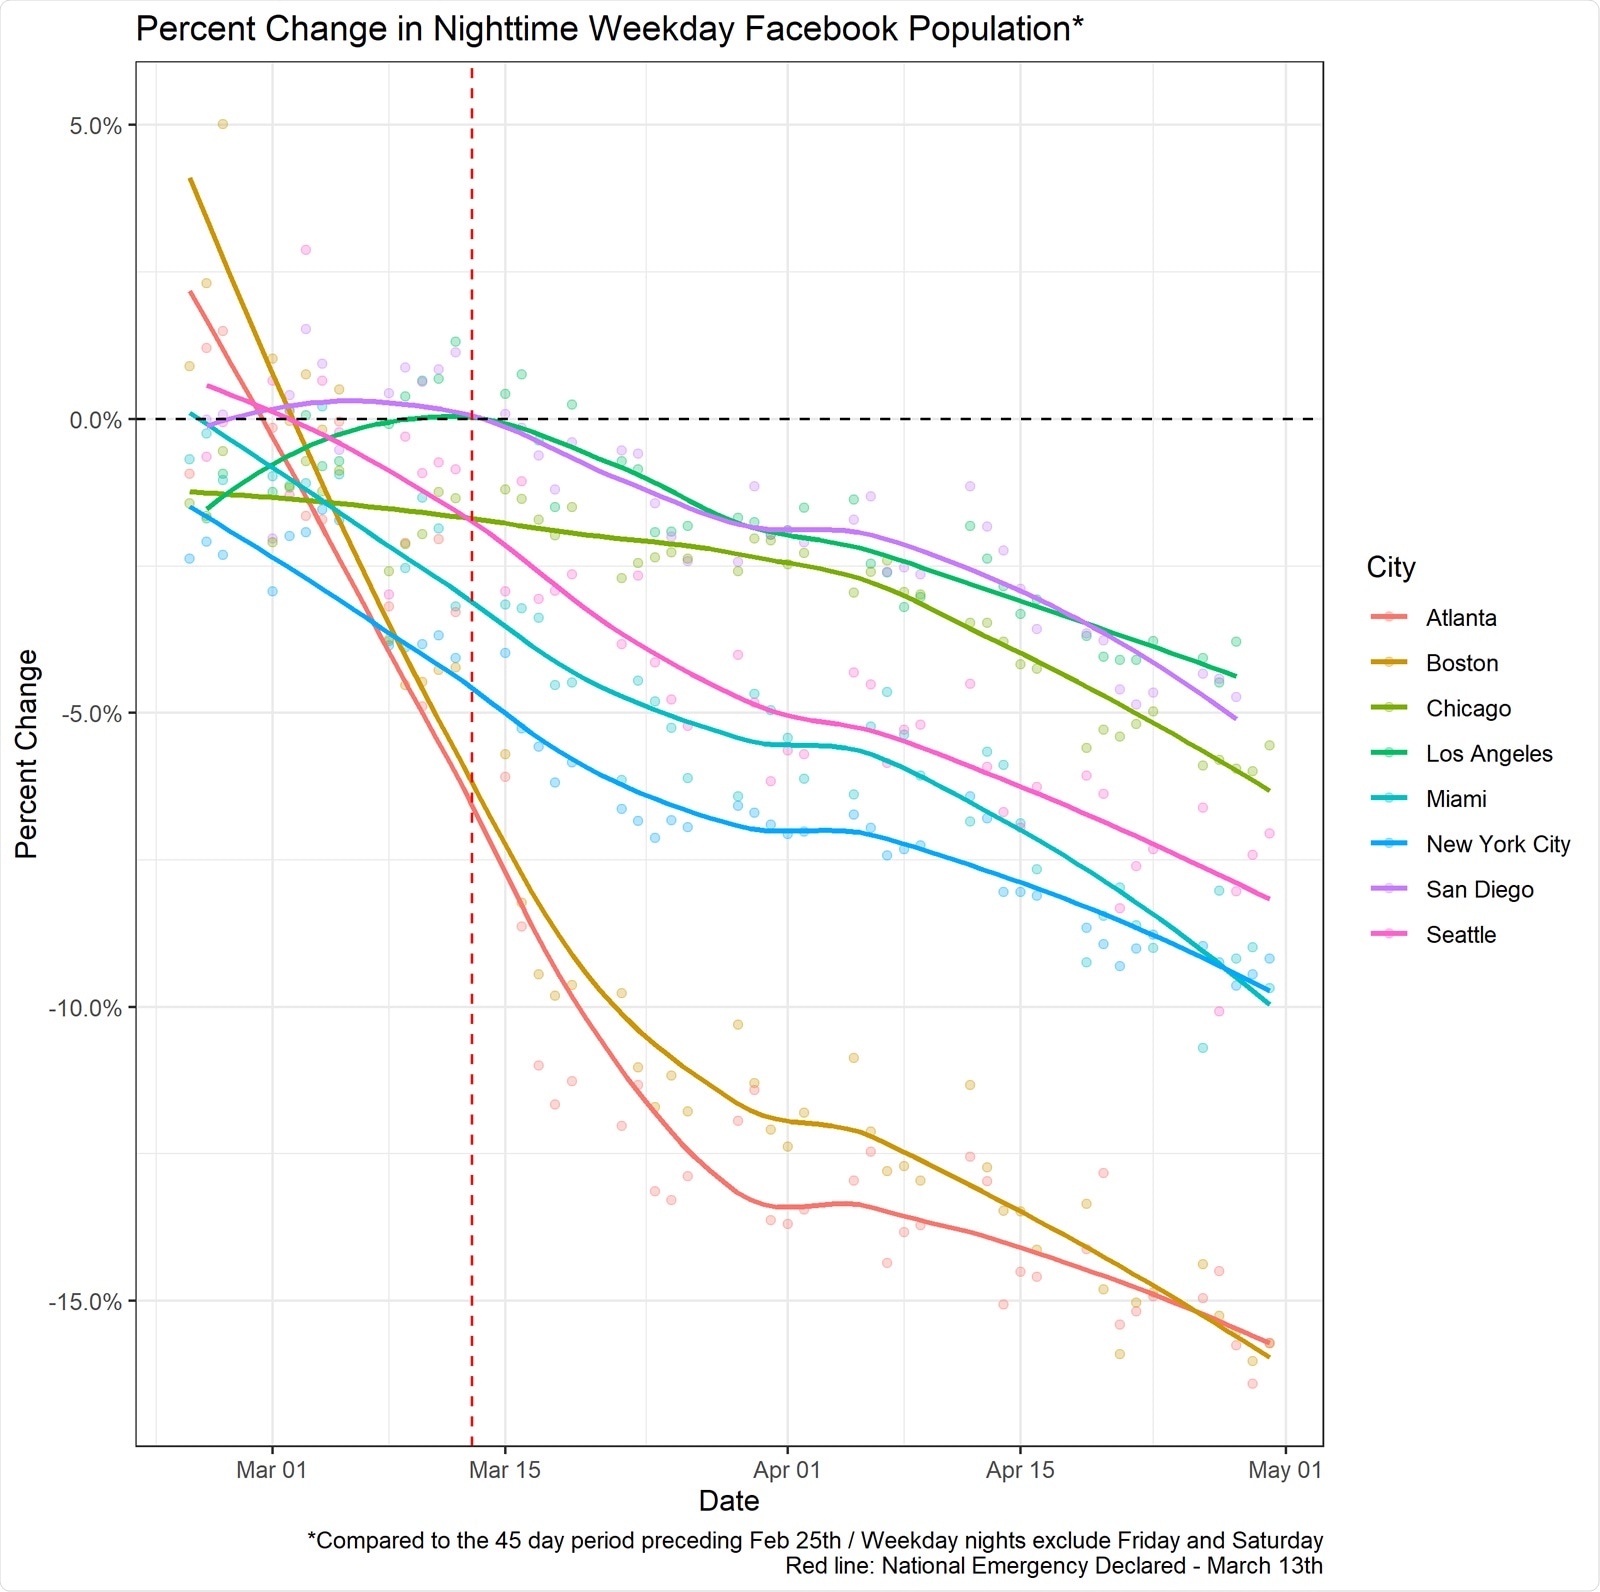 Percent change in weekday nighttime population of Facebook users by city. We can see that all cities included in the Facebook sample experience a decrease in nighttime population over the period of interest.